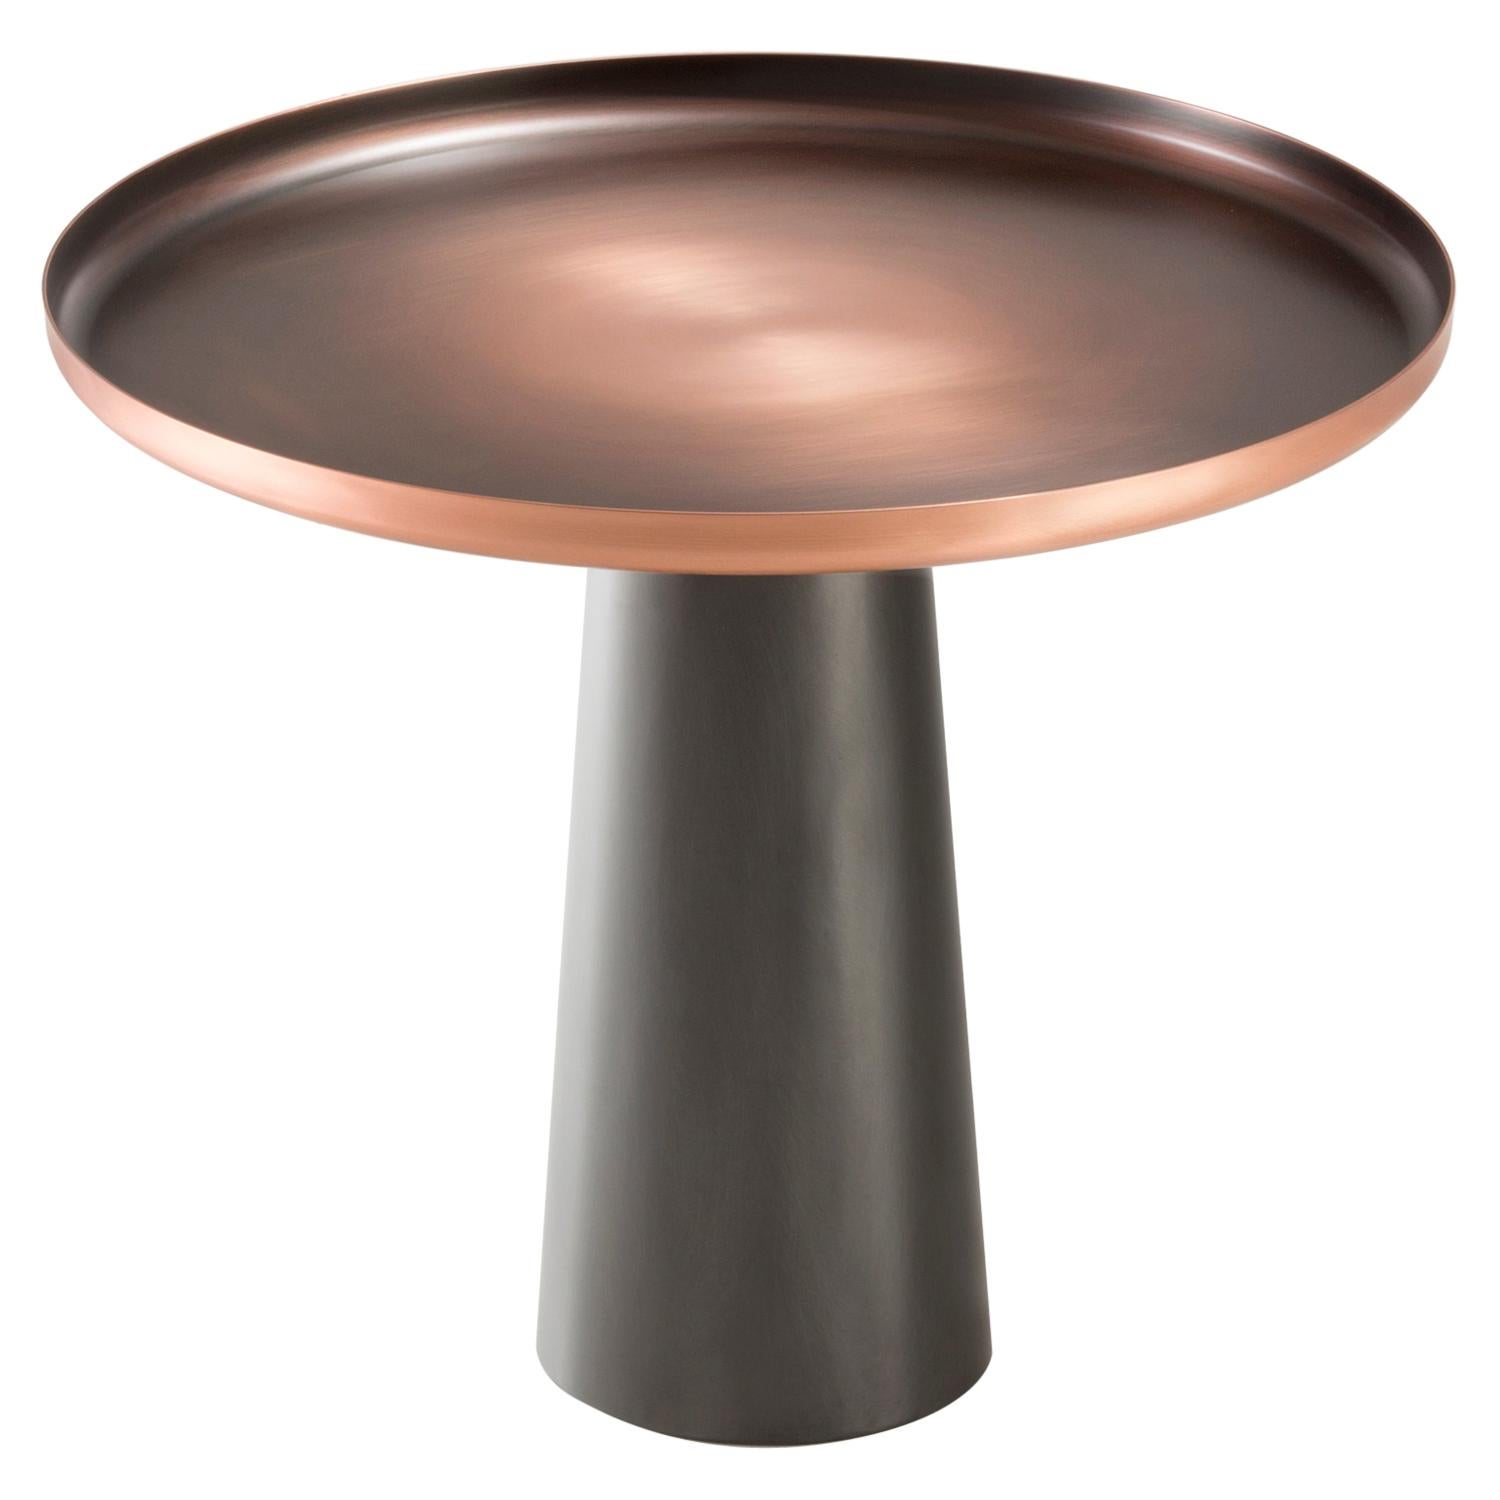 DeCastelli Sunset 60 Coffee Table in Copper Top with Iron Base by Artefatto